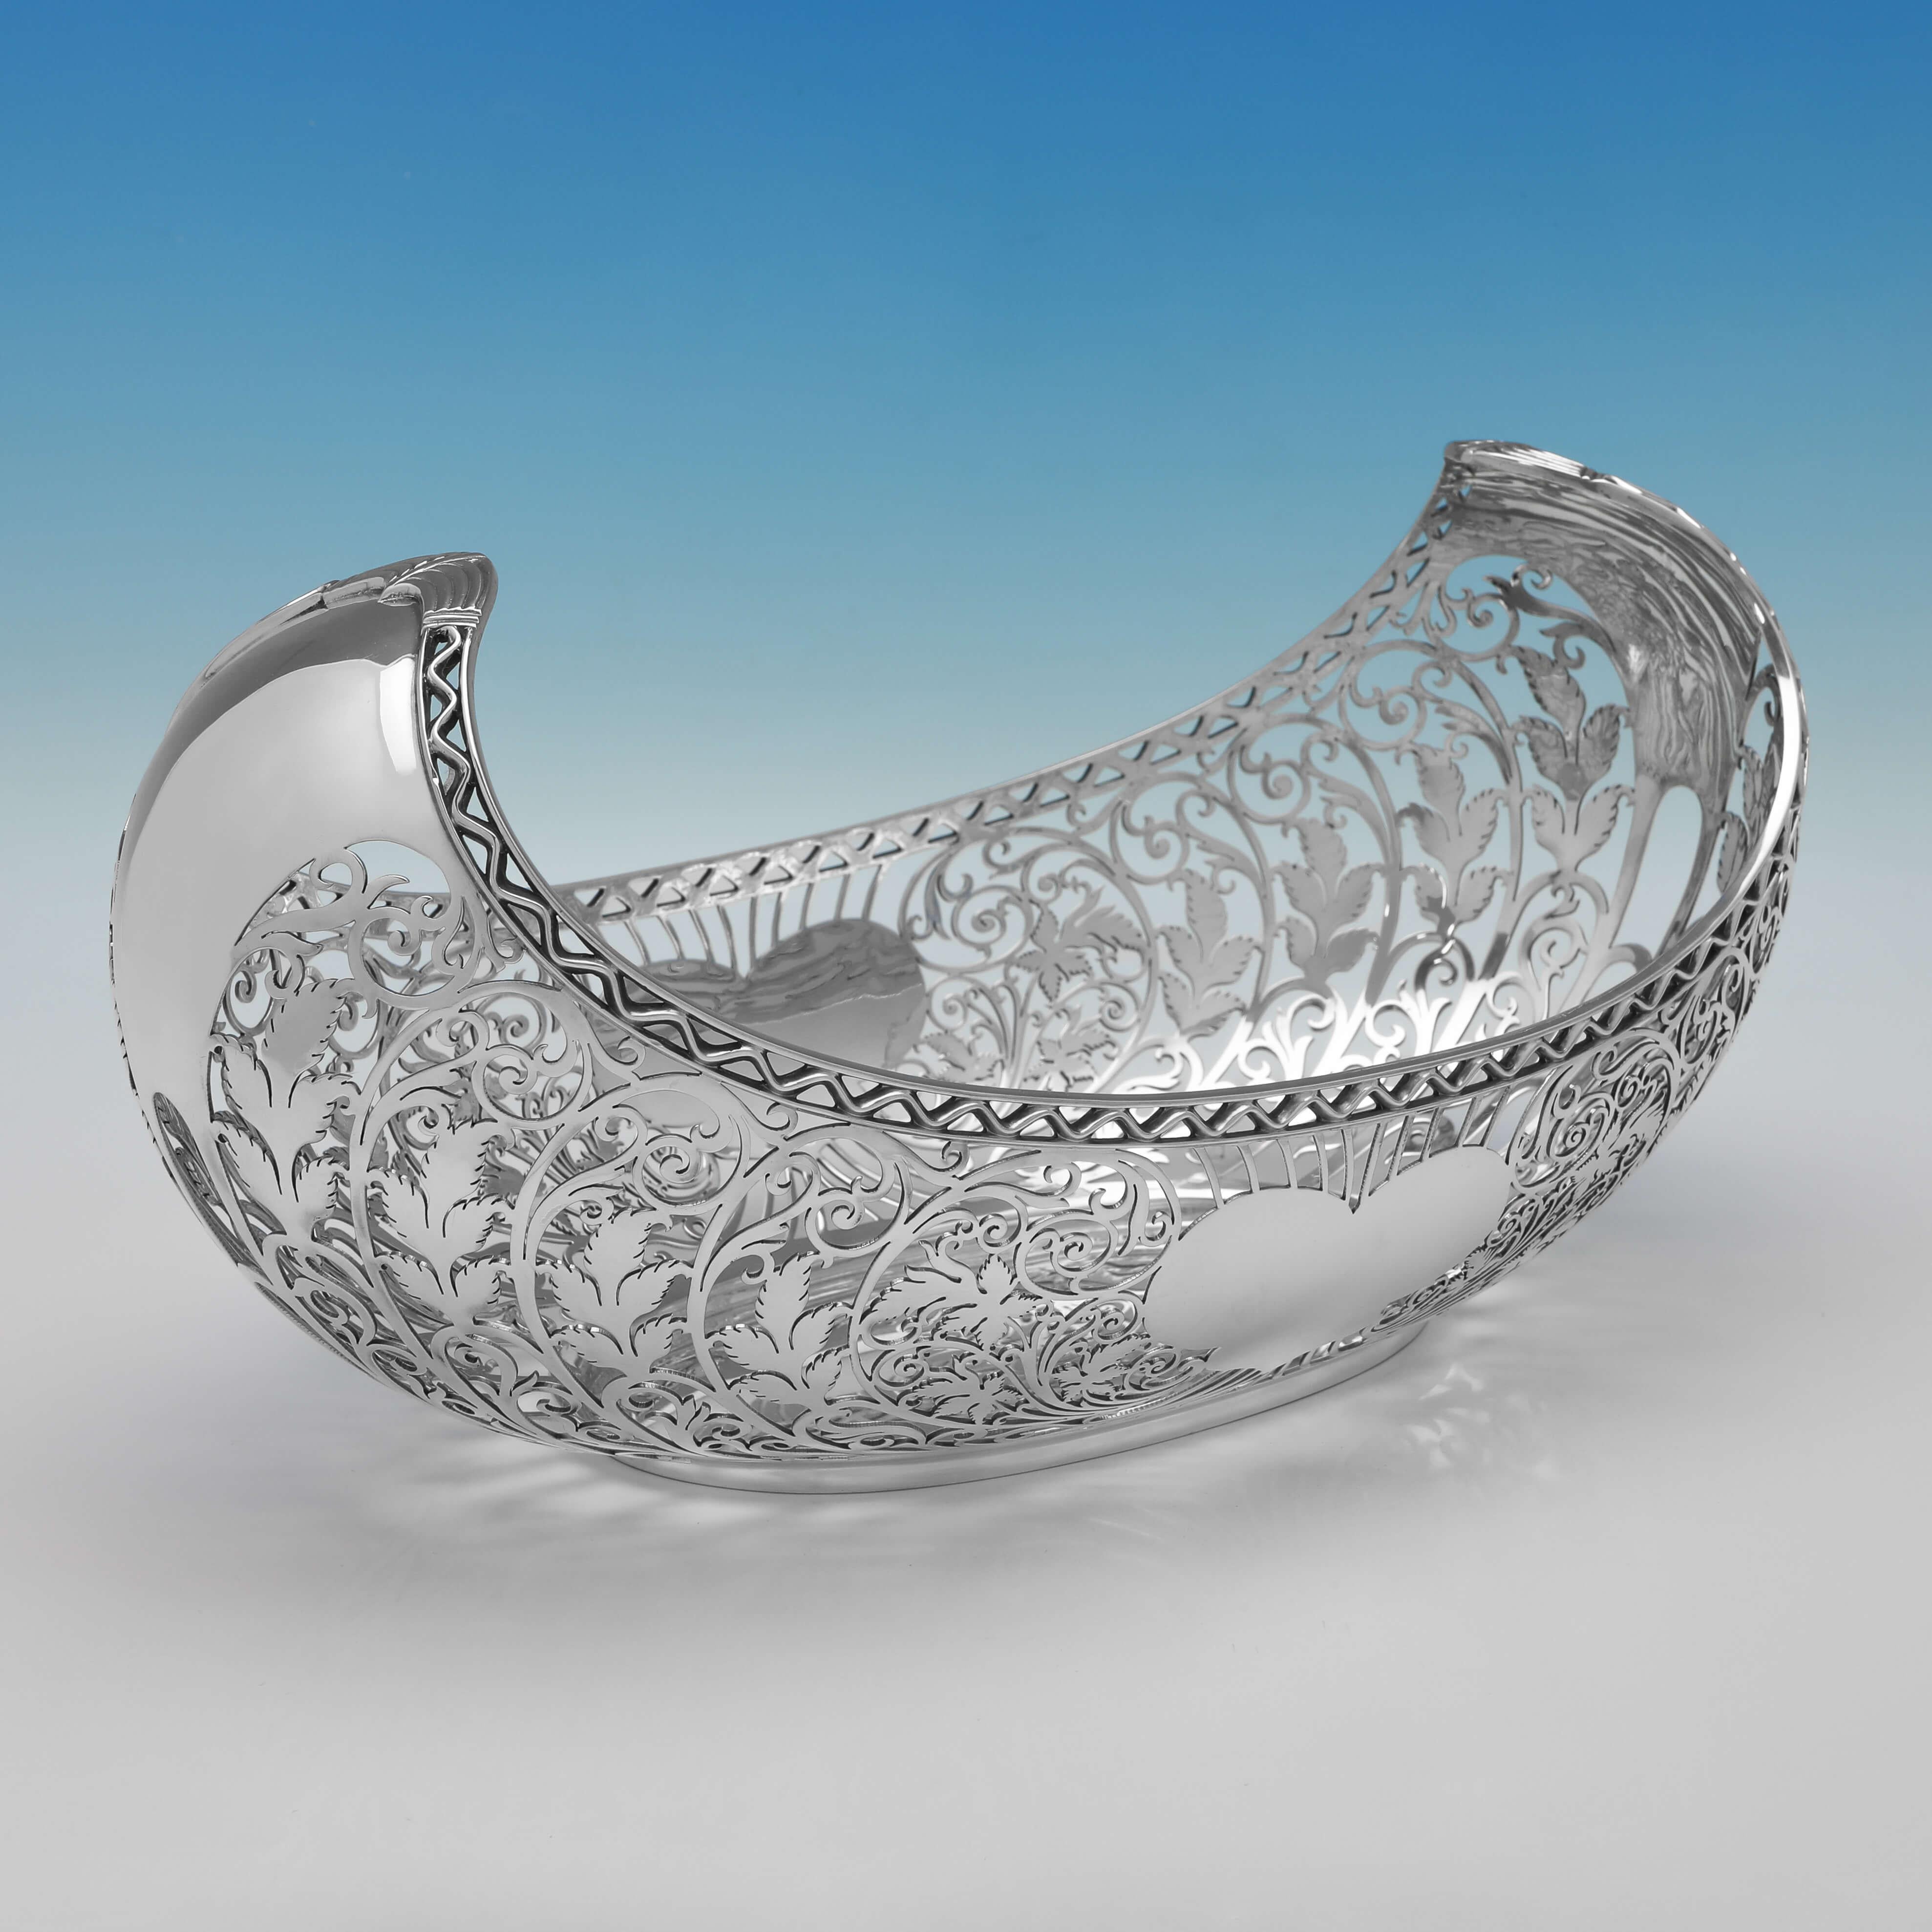 Hallmarked in Sheffield in 1919 (maker unknown but registered in both Sheffield and Birmingham), this striking, Antique Sterling Silver Dish, features pierced detailing throughout and heart shaped cartouches. 

The dish measures 7.5